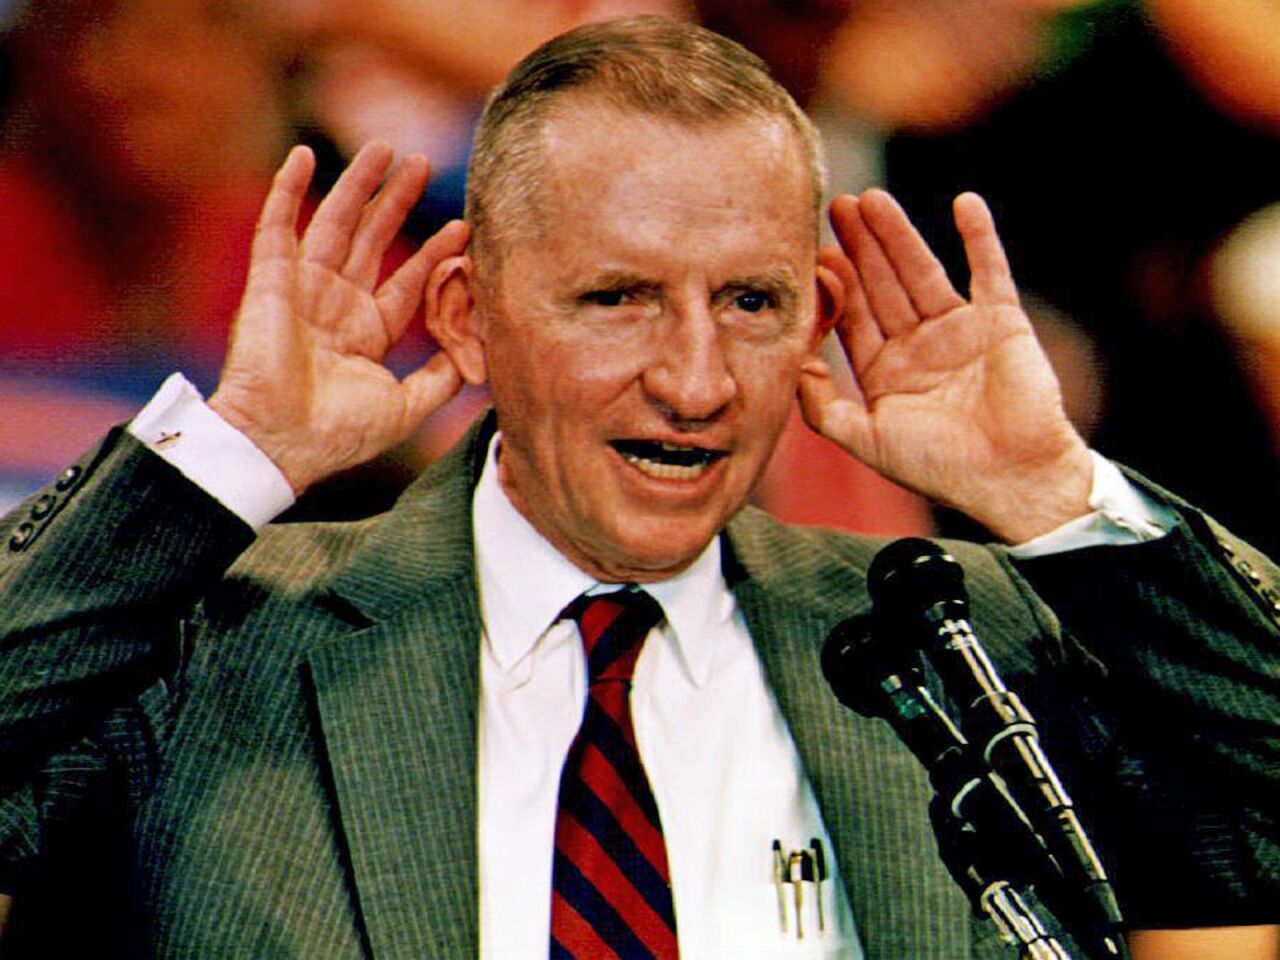 Billionaire Ross Perot blazed across America in the 1990s as a third-party presidential candidate and won nearly 19% of the popular vote in the 1992 election, finishing third behind Democrat Bill Clinton and Republican President George H.W. Bush. The diminutive Texan was an early tech entrepreneur who founded Electronic Data Systems, a computer services company, in 1962 with $1,000 in savings. He was 89.